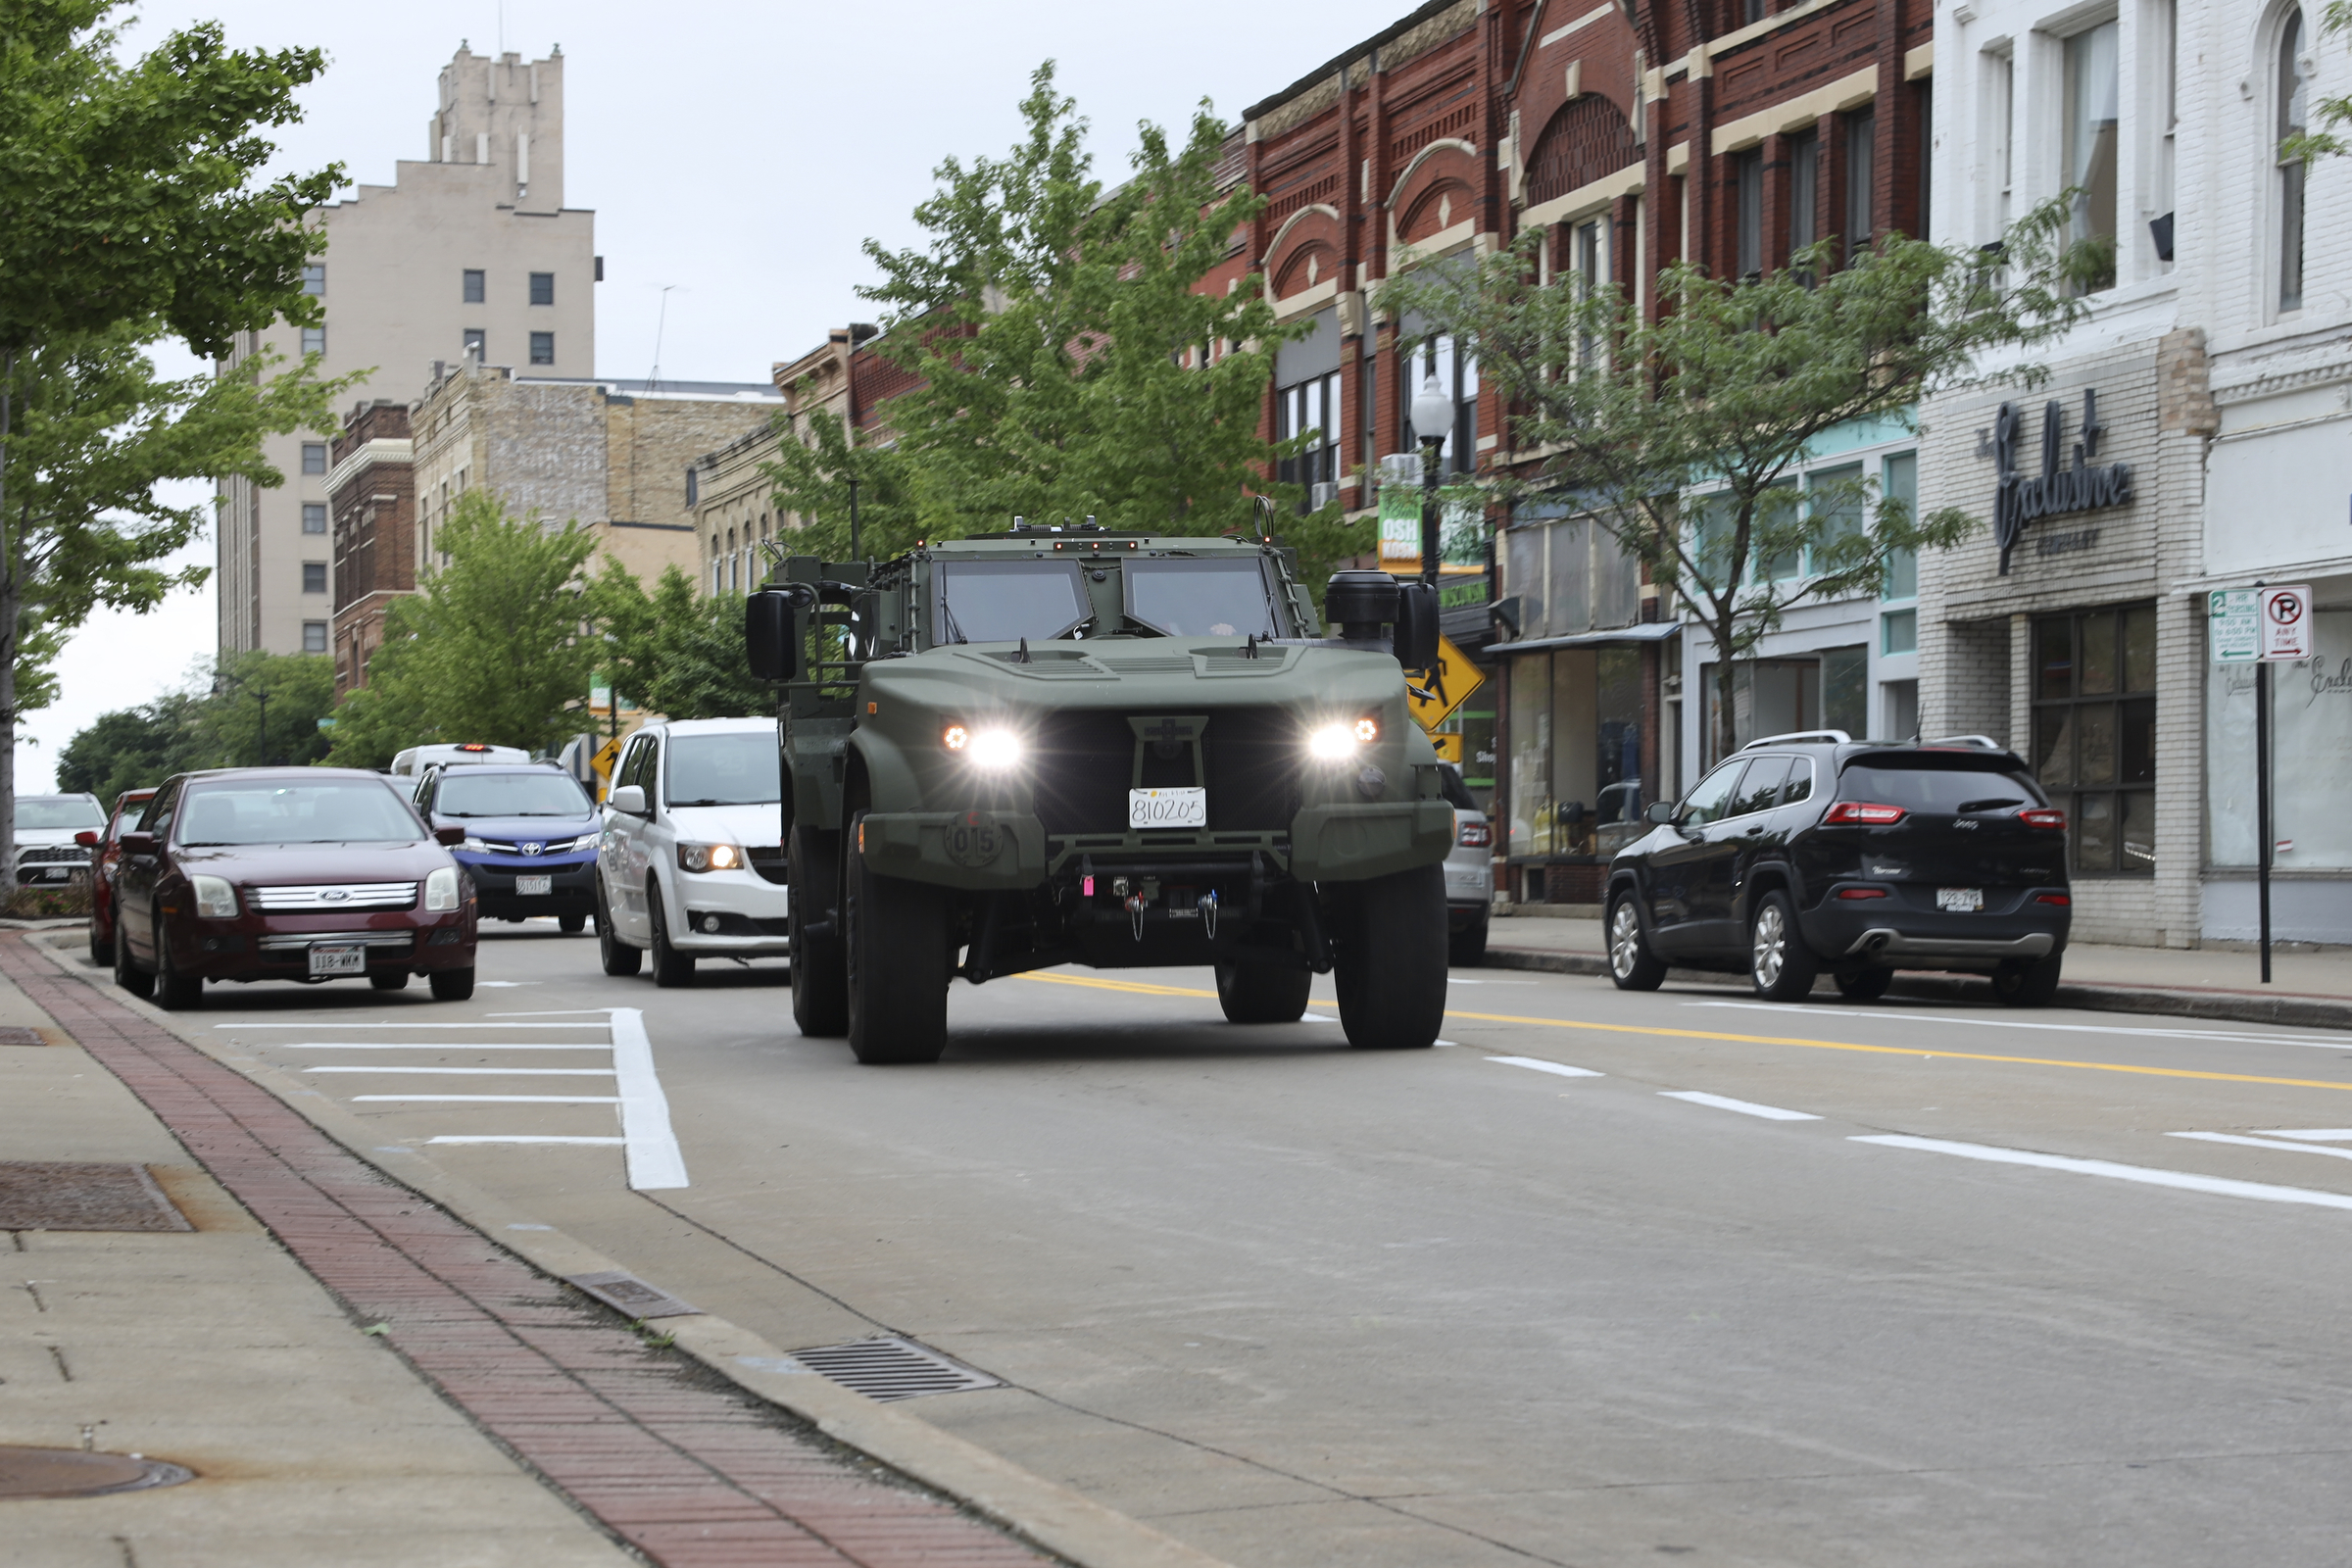 Oshkosh Defense manufactures tactical vehicles for the Pentagon that regularly drive down the city’s streets